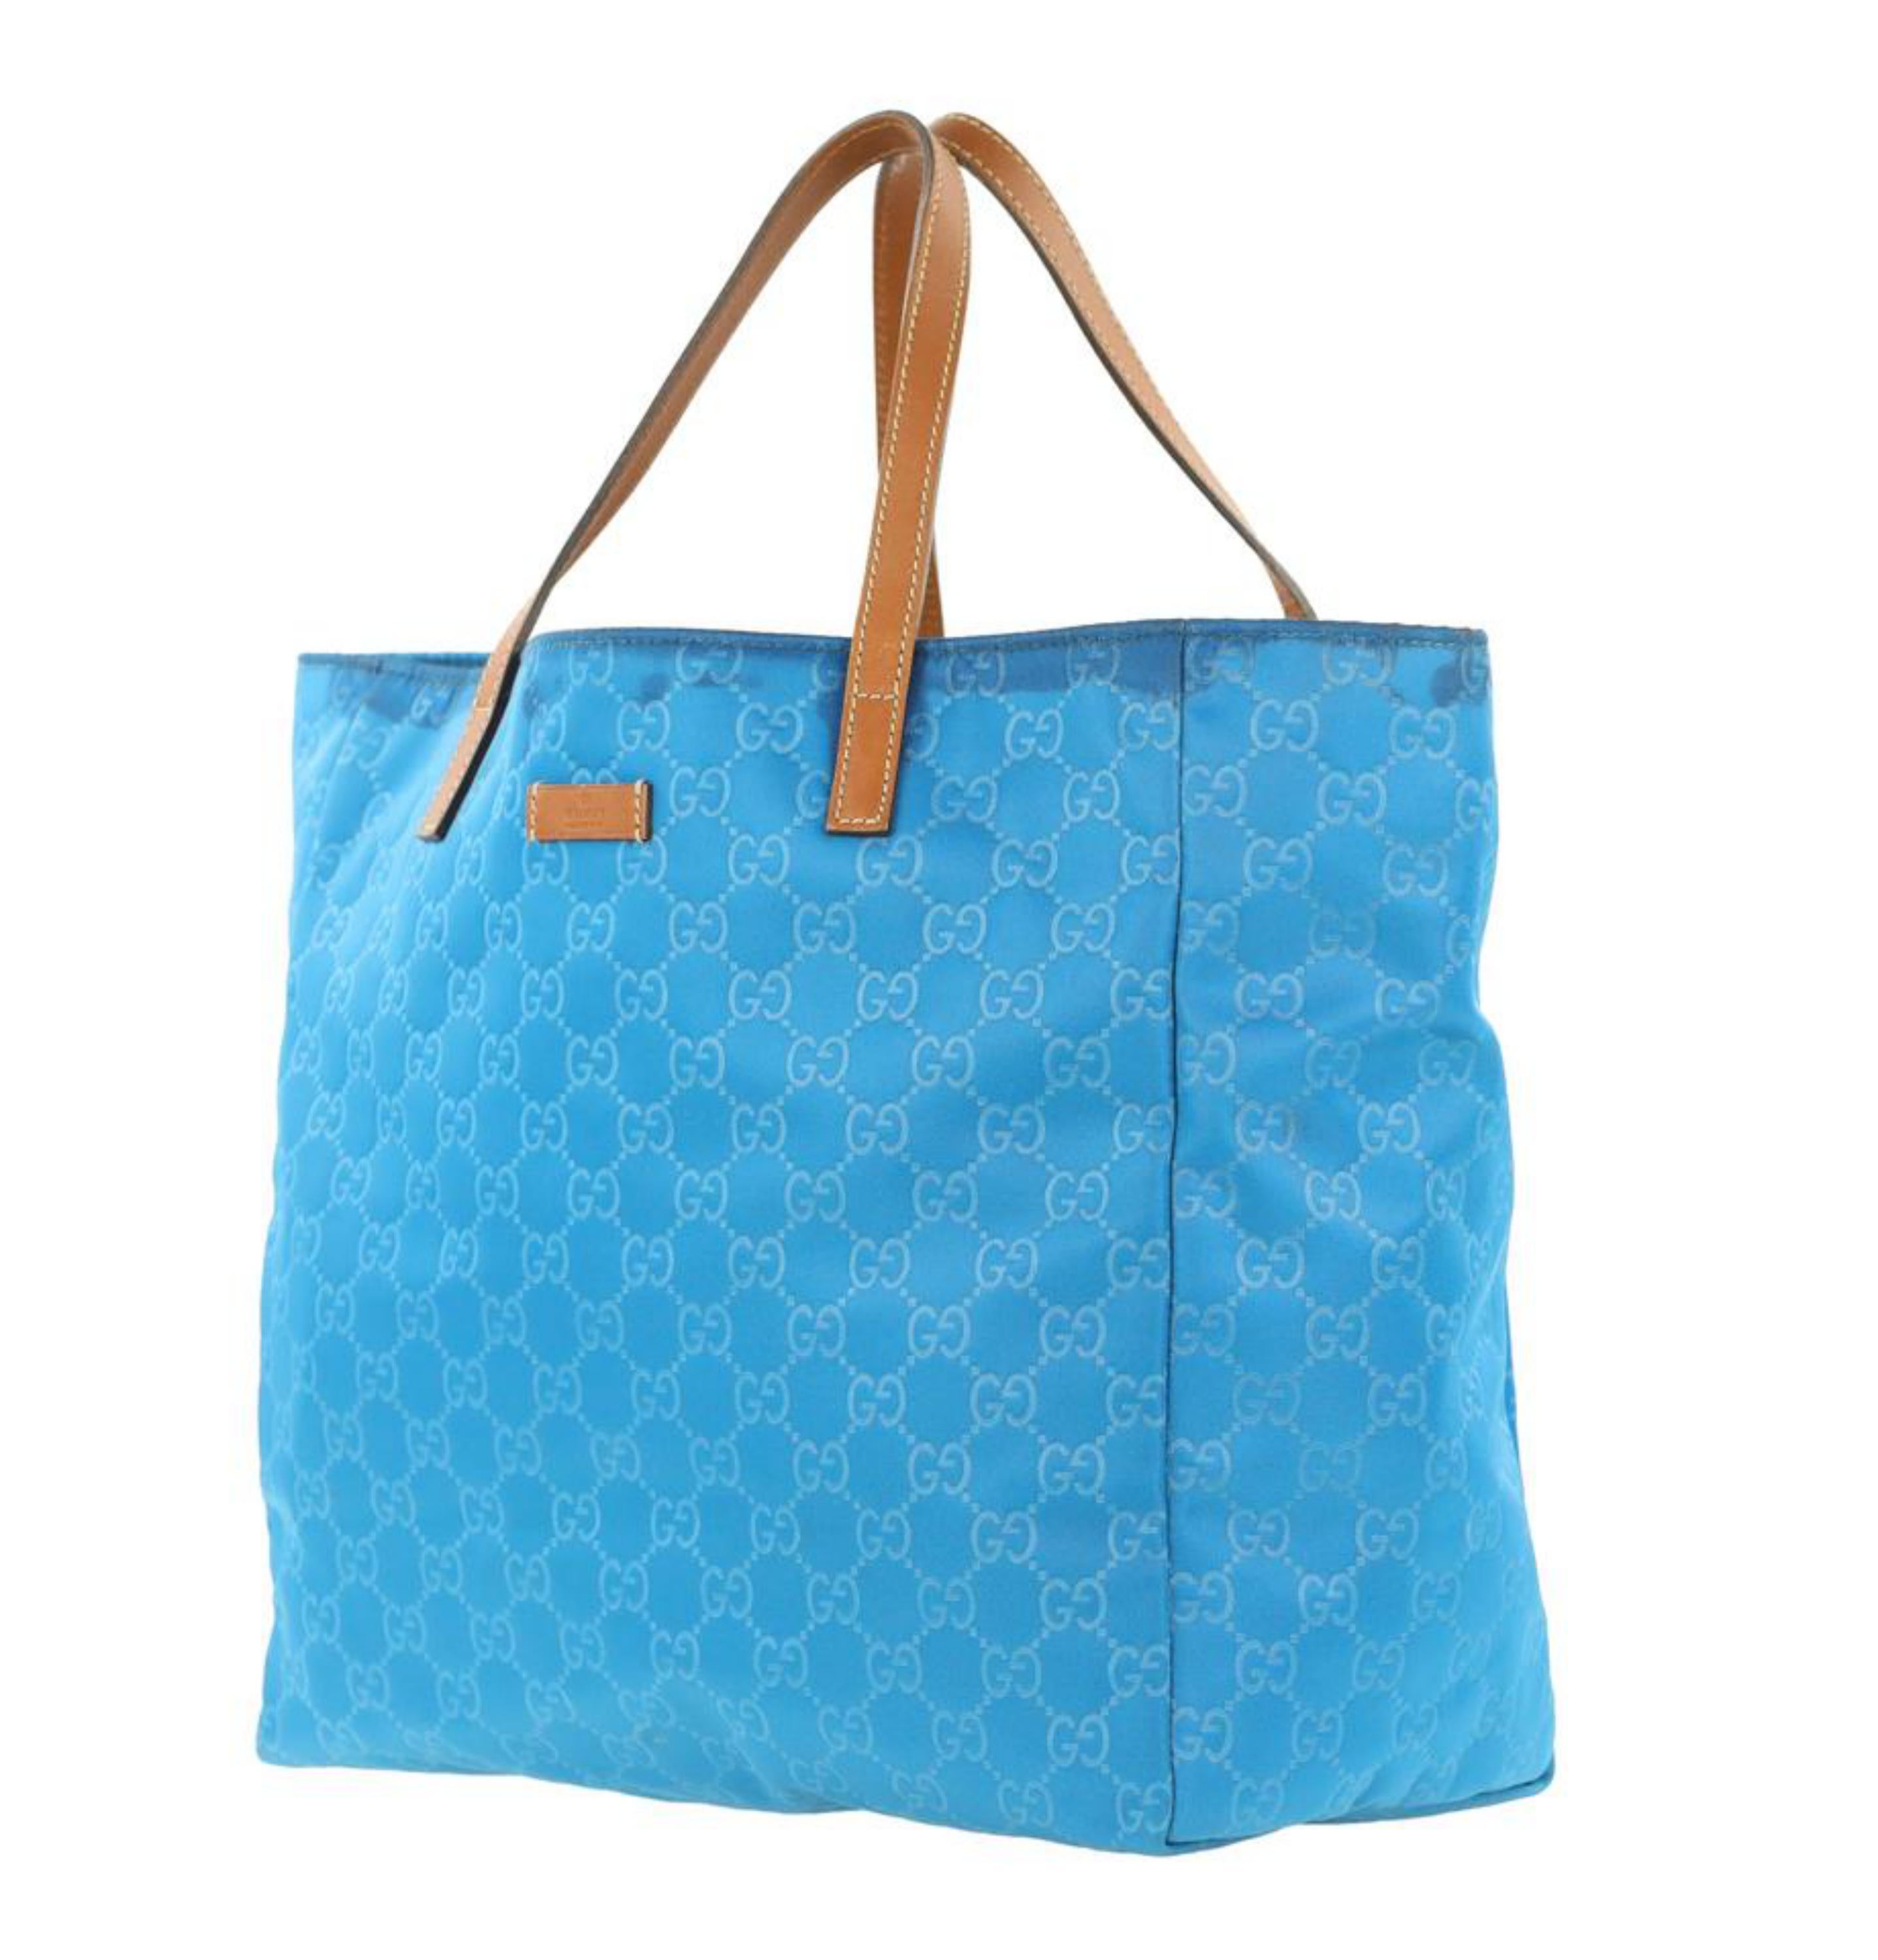 Gucci Shopping Blue Canvas Tote 867355 In Fair Condition For Sale In Forest Hills, NY